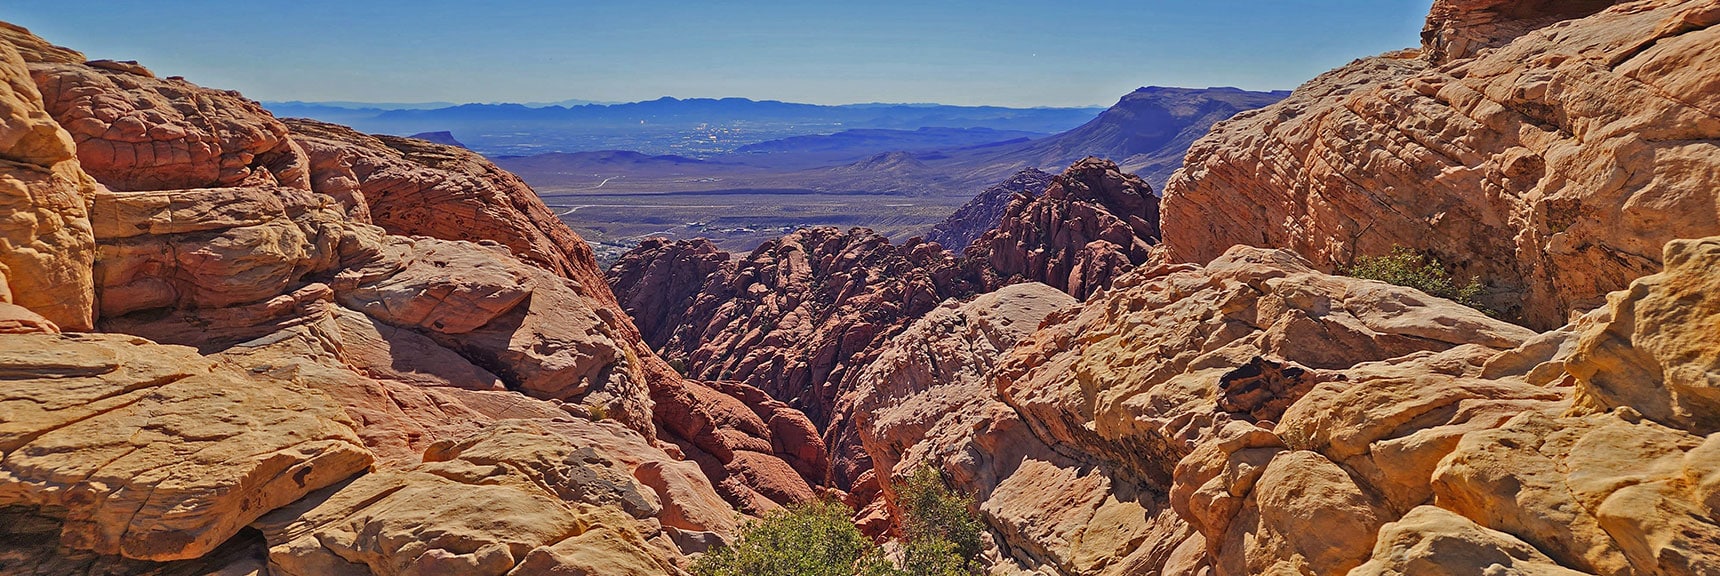 However, the Spectacular View at the Trail Summit is Always There! Las Vegas Valley Background. | Calico Tanks | Red Rock Canyon National Conservation Area, Nevada